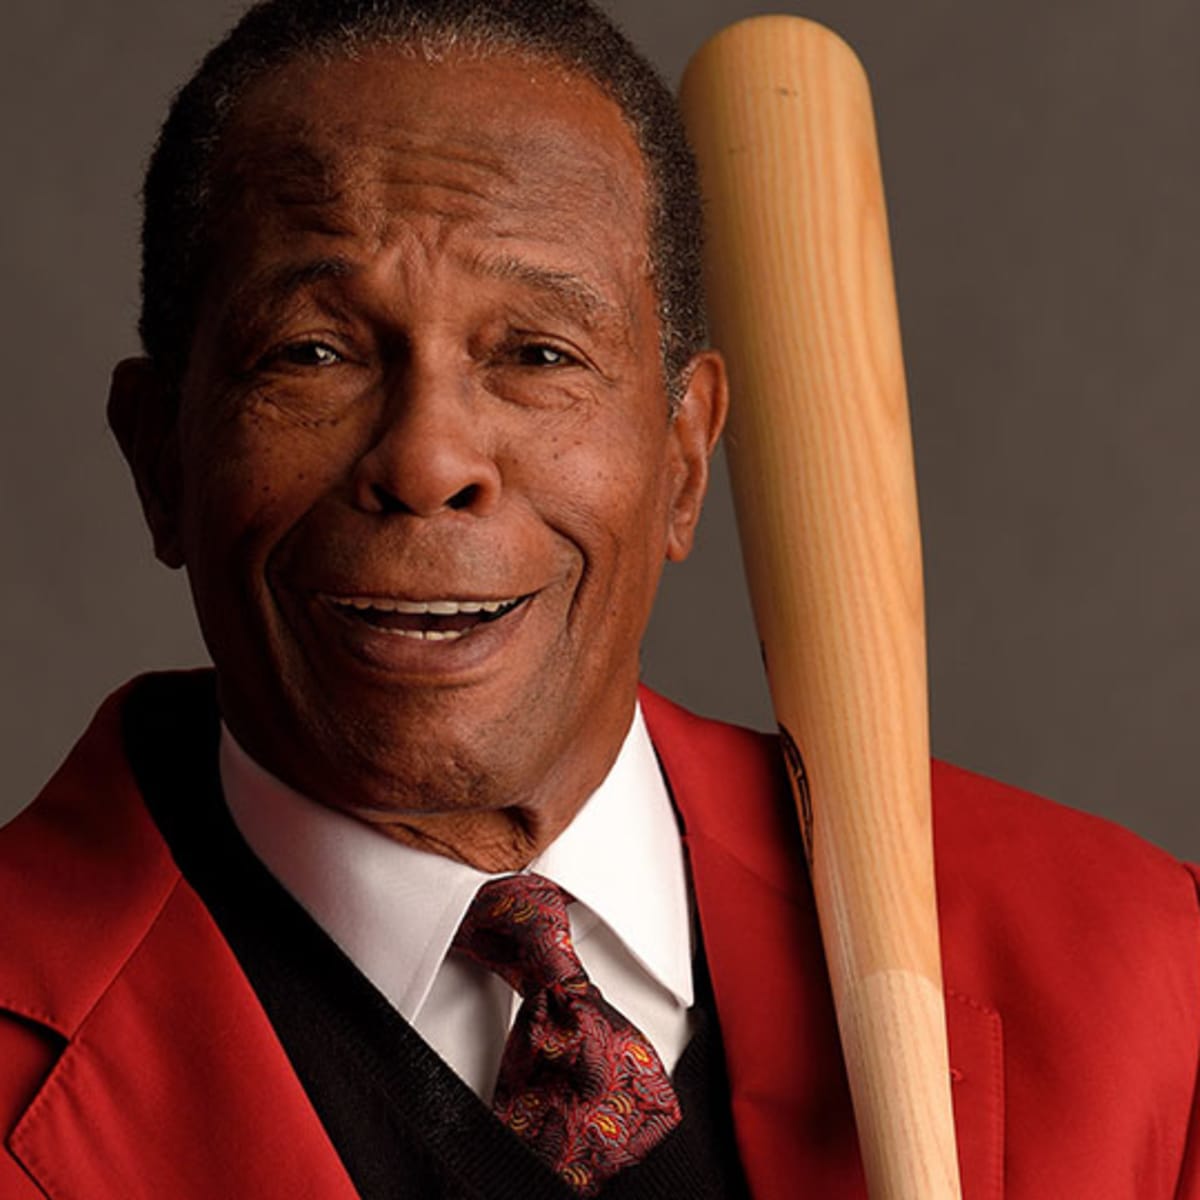 Hall of Famer Rod Carew talks about his near-death experience